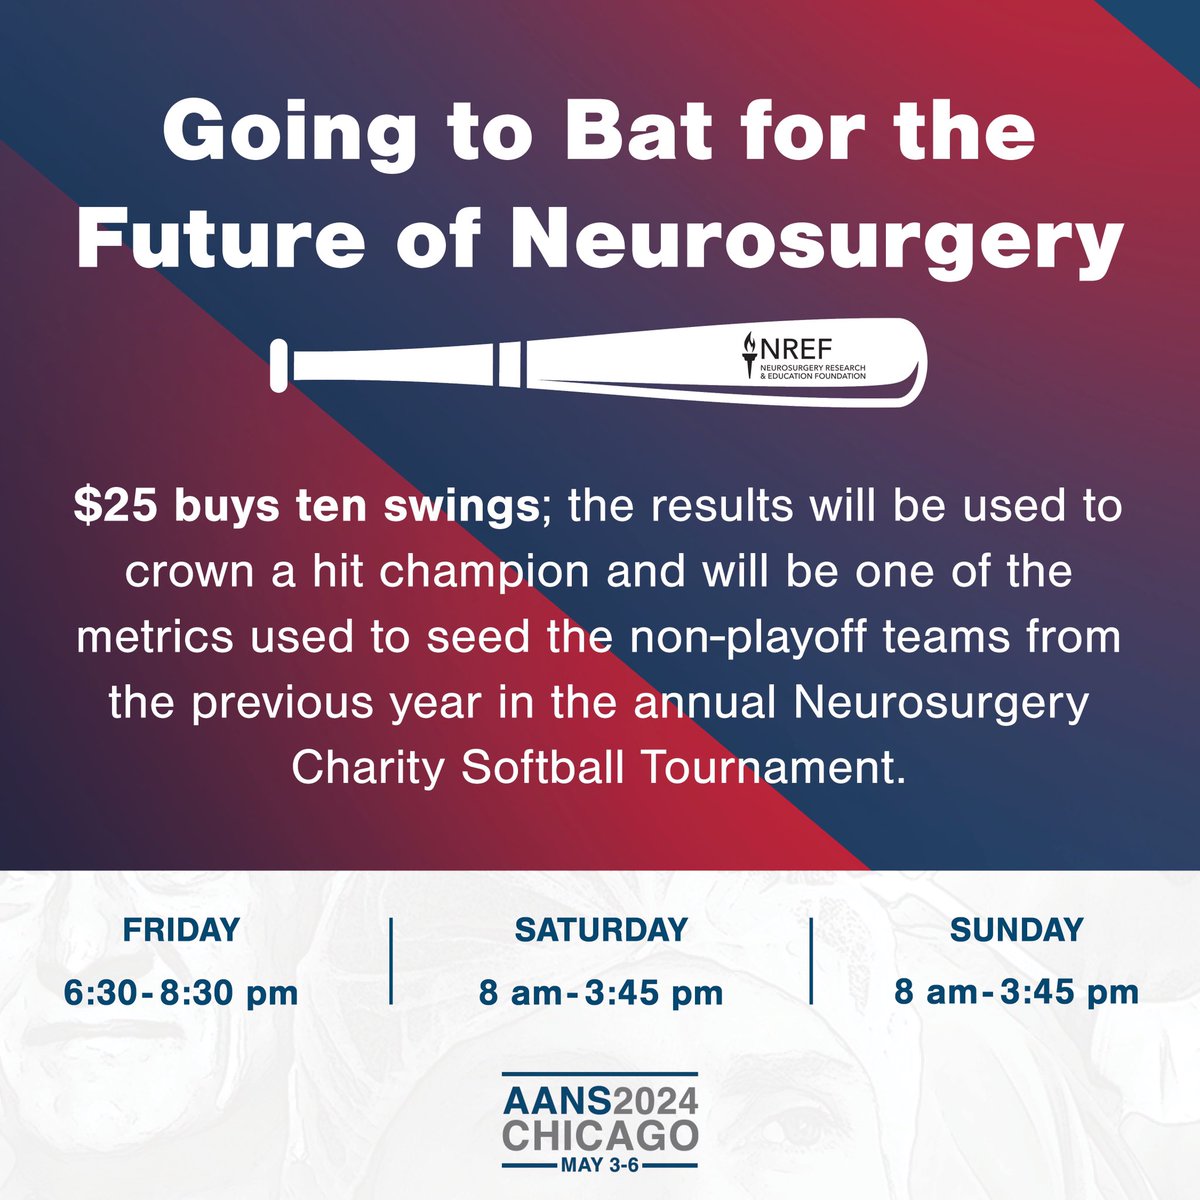 Make sure to visit the NREF exhibit hall to participate in the “Going to Bat for the Future of Neurosurgery” at the #AANS2024 conference! @AANSNeuro @IsaacYangMD @UCLANsgy @UCLAHealth @KatieOrrico @jacquesmorcosmd #whatmatters2me